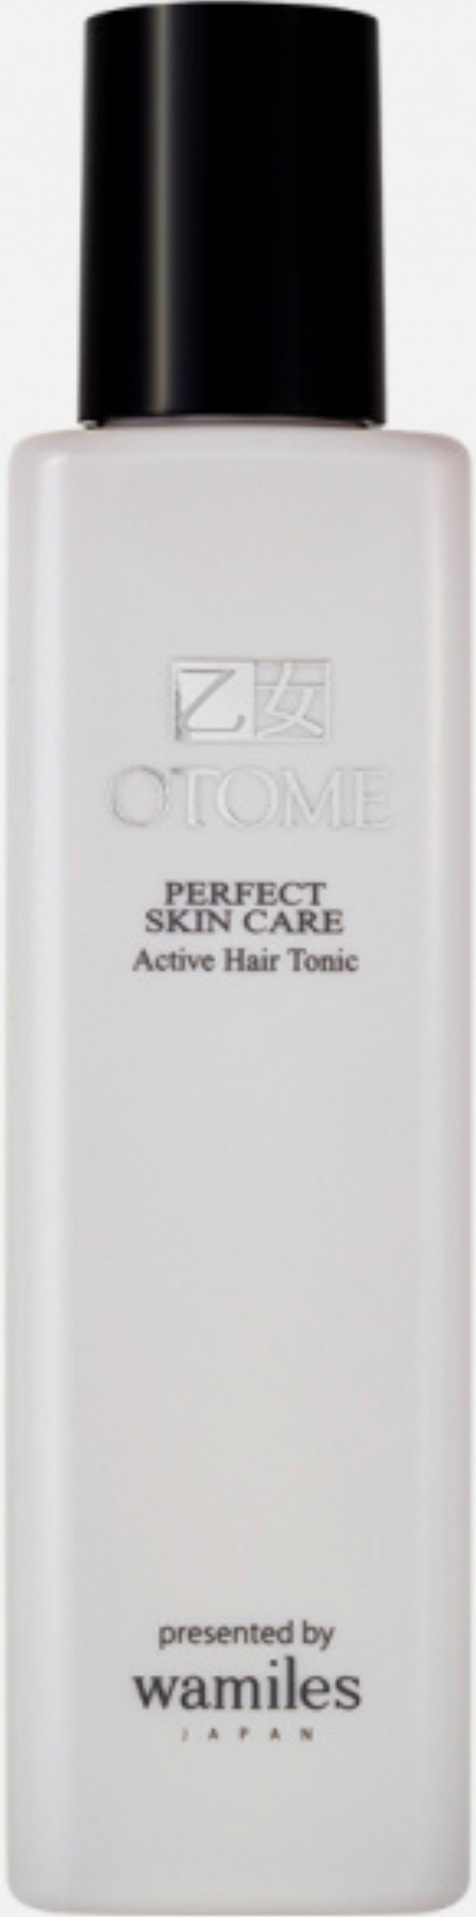 Otome Hair Loss Tonic For Women Perfect Skin Care